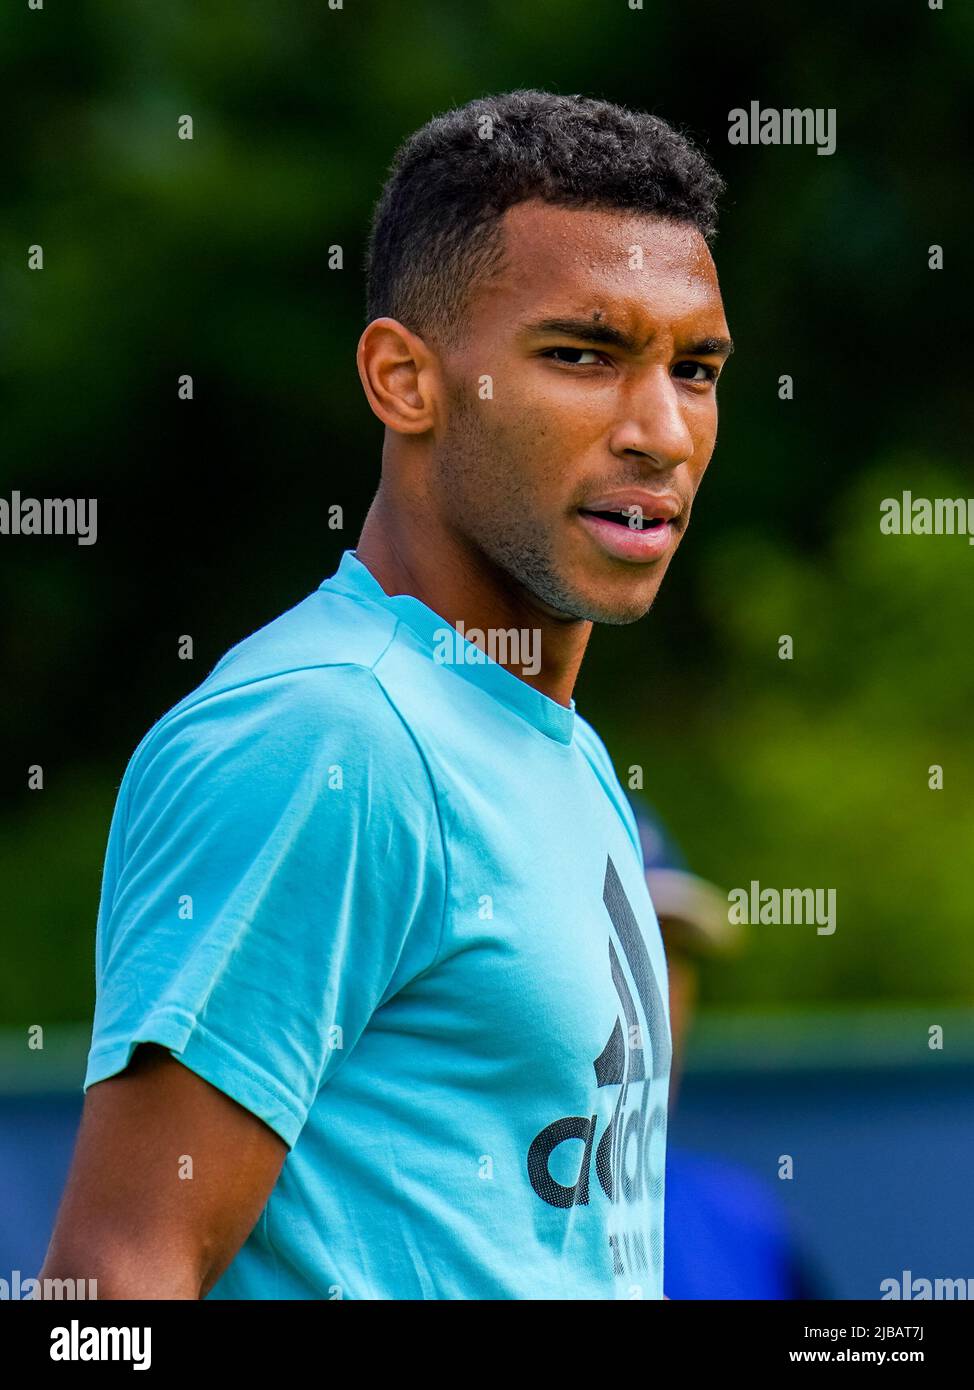 'S-HERTOGENBOSCH, NETHERLANDS - JUNE 4: Felix Auger-Aliassime of Canada during a Practice Session of the Libema Open Grass Court Championships at the Autotron on June 4, 2022 in 's-Hertogenbosch, Netherlands (Photo by Rene Nijhuis/BSR Agency) Stock Photo